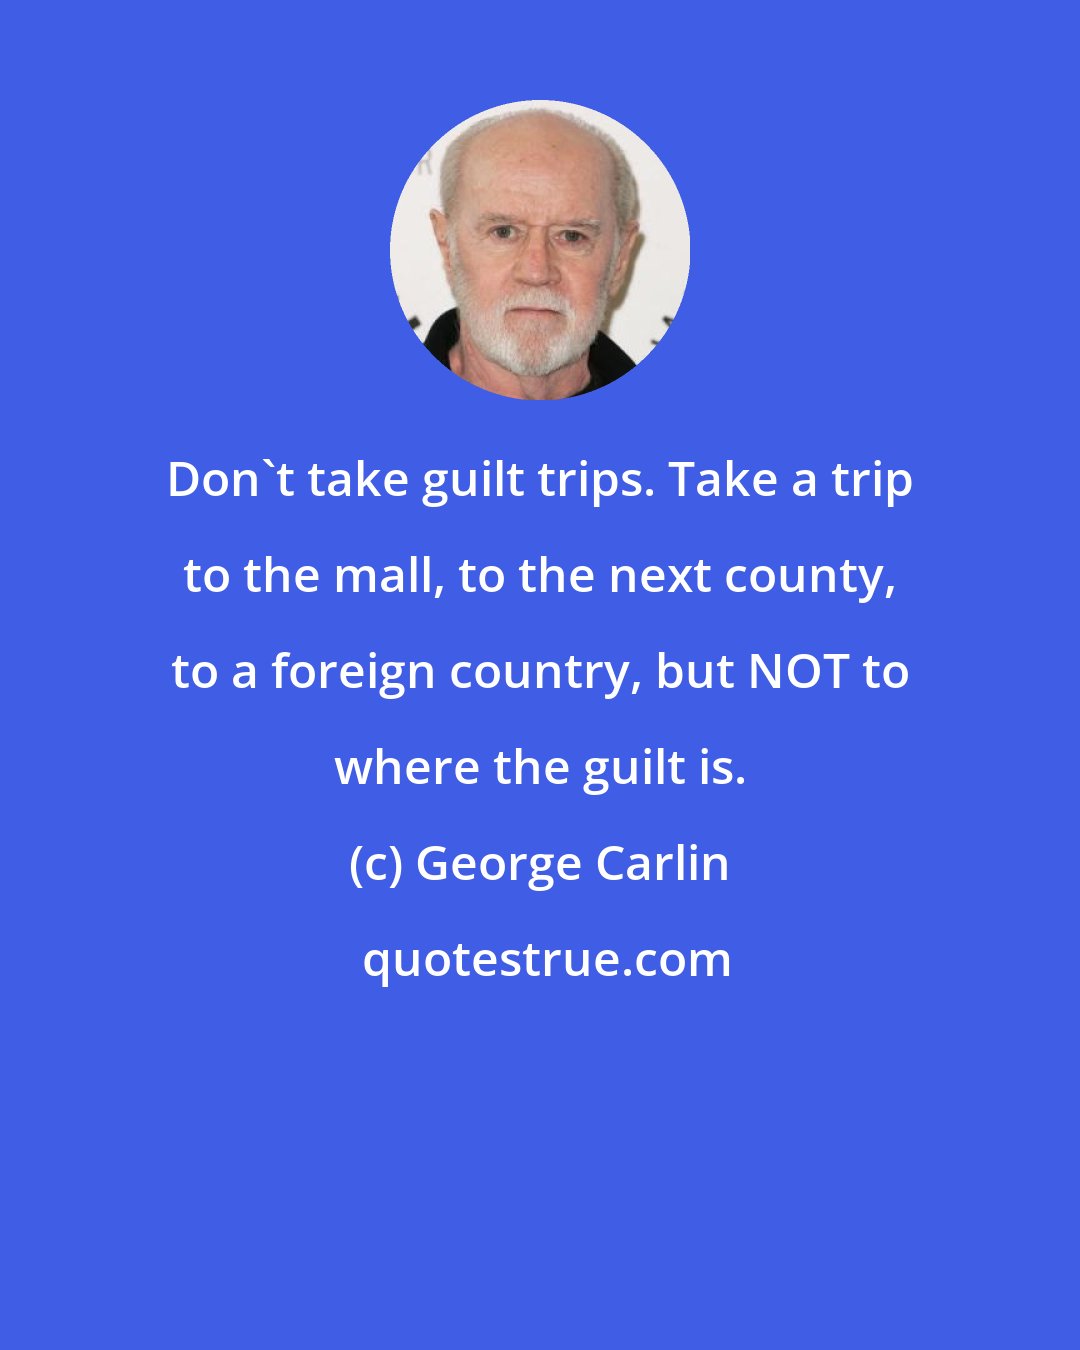 George Carlin: Don't take guilt trips. Take a trip to the mall, to the next county, to a foreign country, but NOT to where the guilt is.